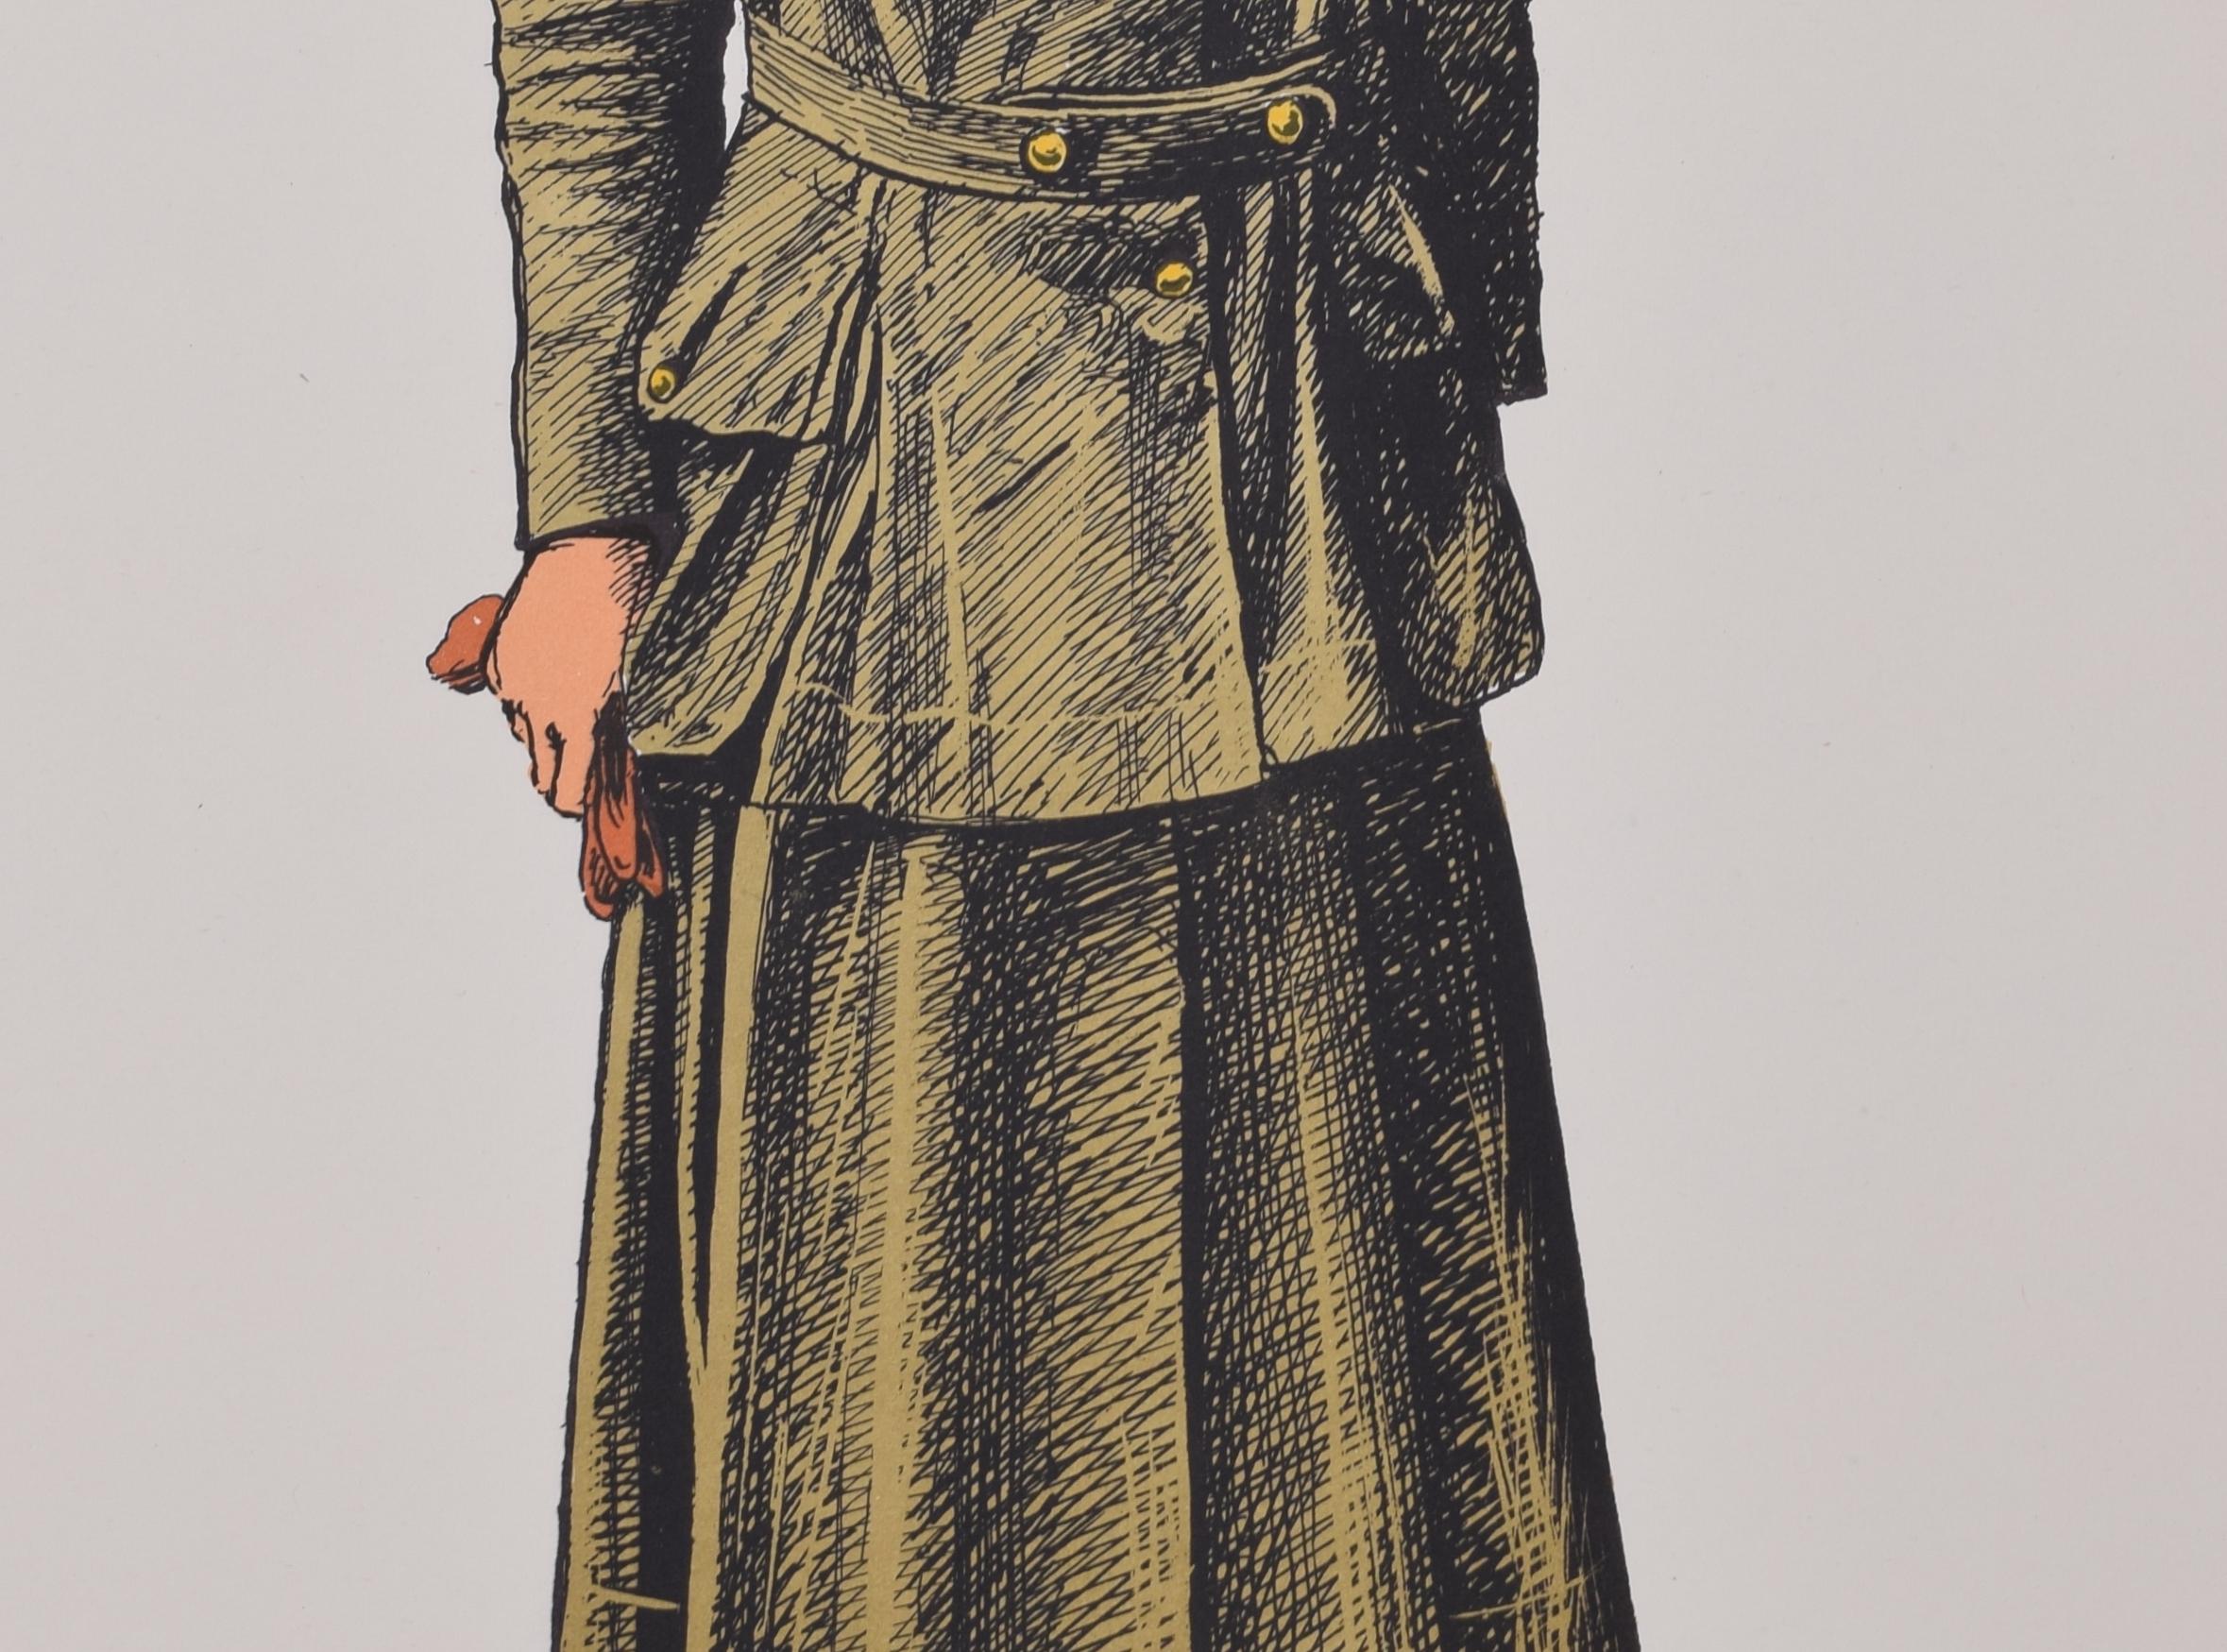 Women's Auxiliary Army Corps Officer (Clerical Section) 1917 uniform
Lithograph
50 x 31 cm

Produced for the Institute of Army Education. Printed for HM Stationery Office by I A Limited, Southall 51.

These posters were produced by the Institute of